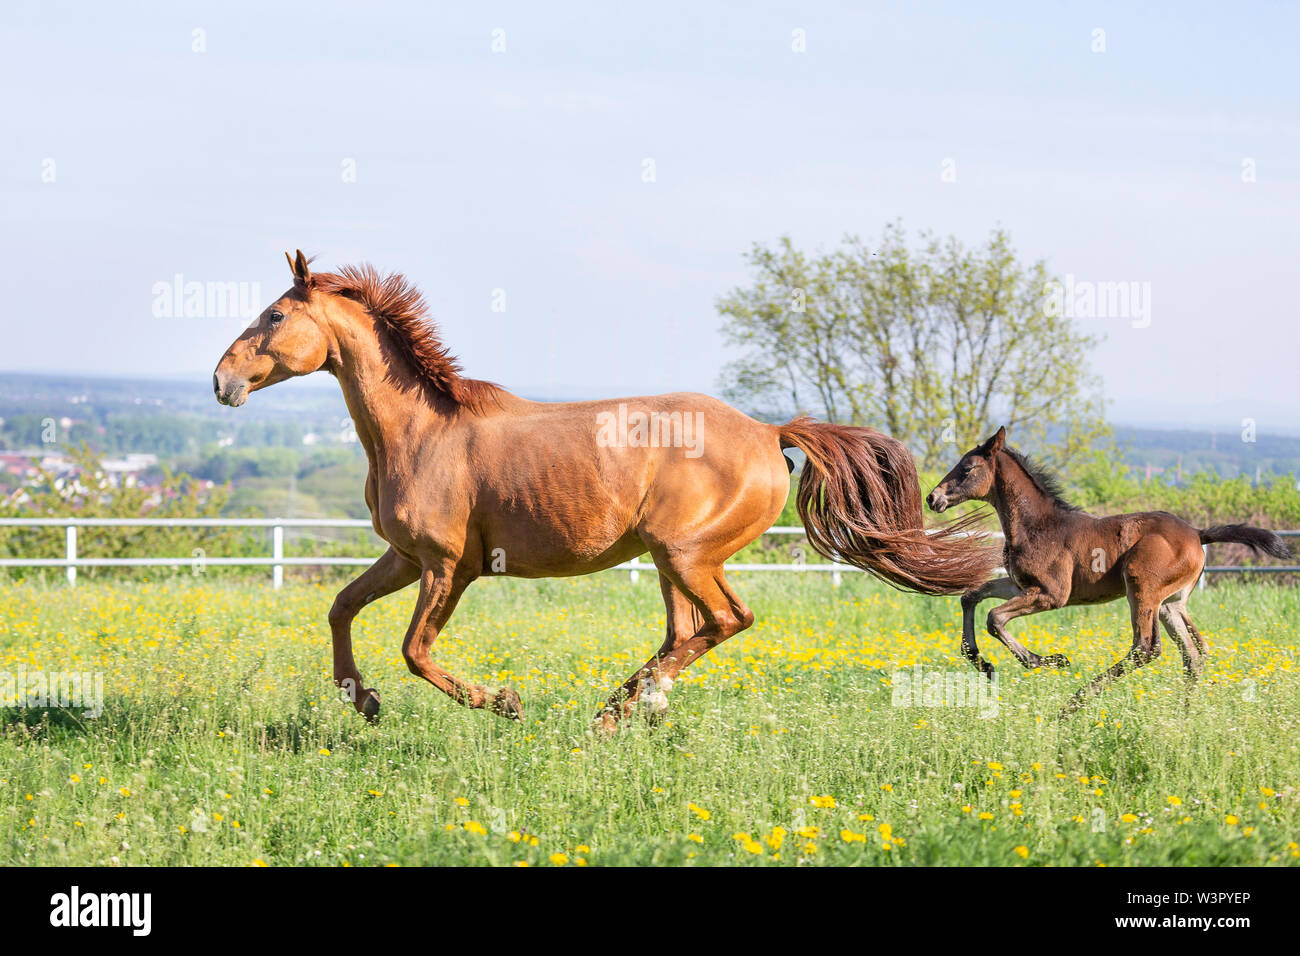 Trakehner. Chestnut mare with bay foal galloping on a pasture. Germany Stock Photo